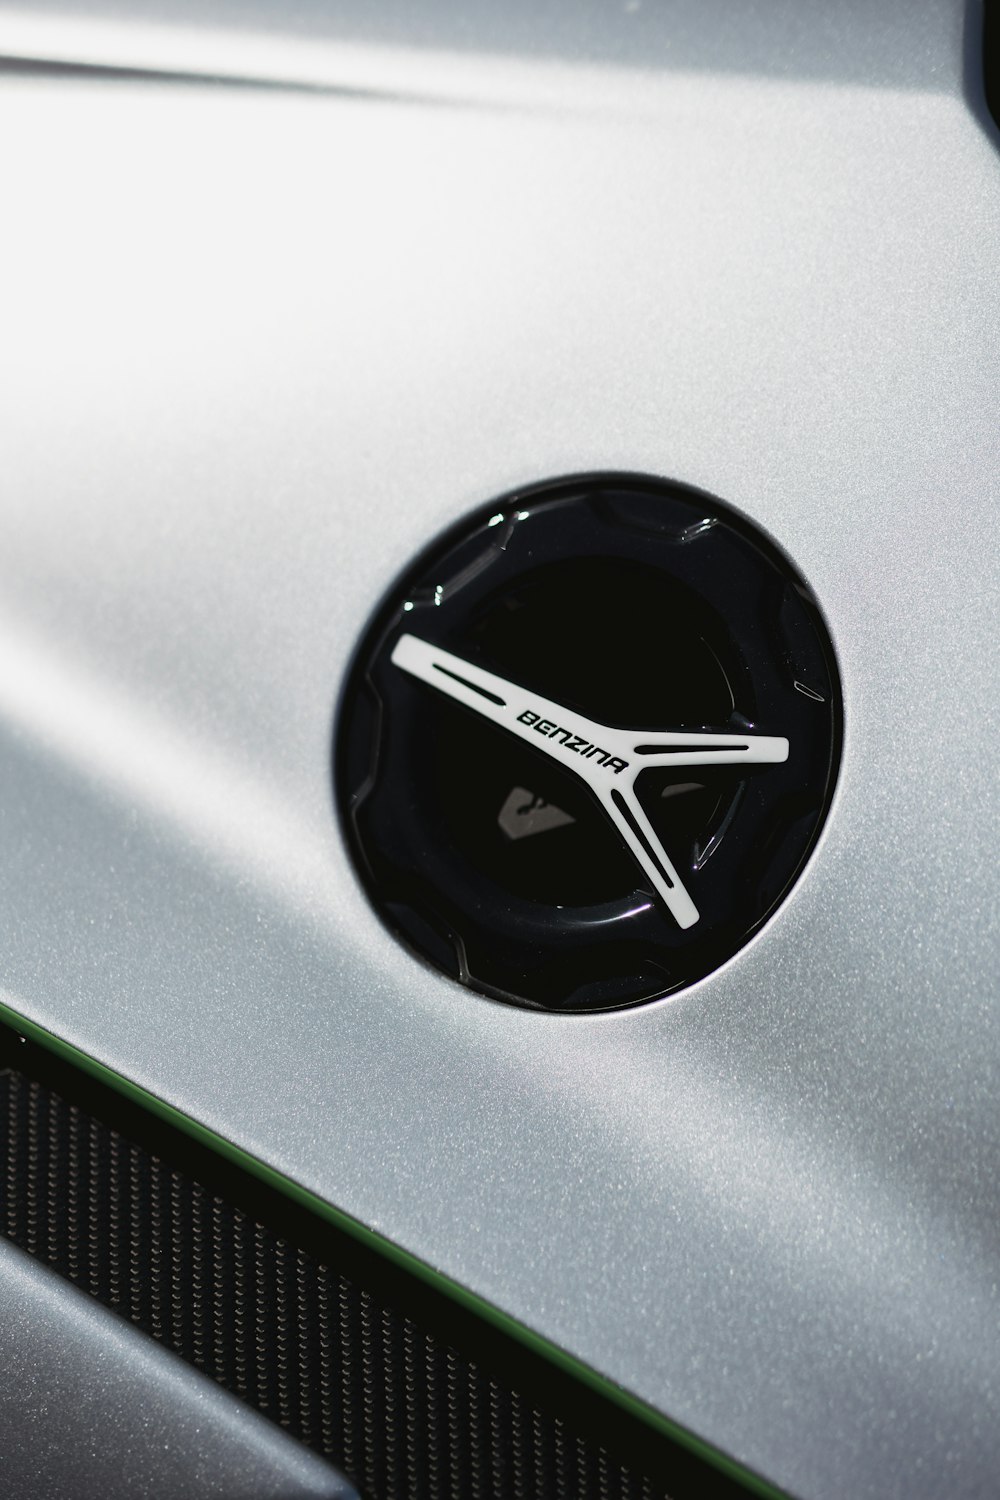 a close up of a clock on the side of a car